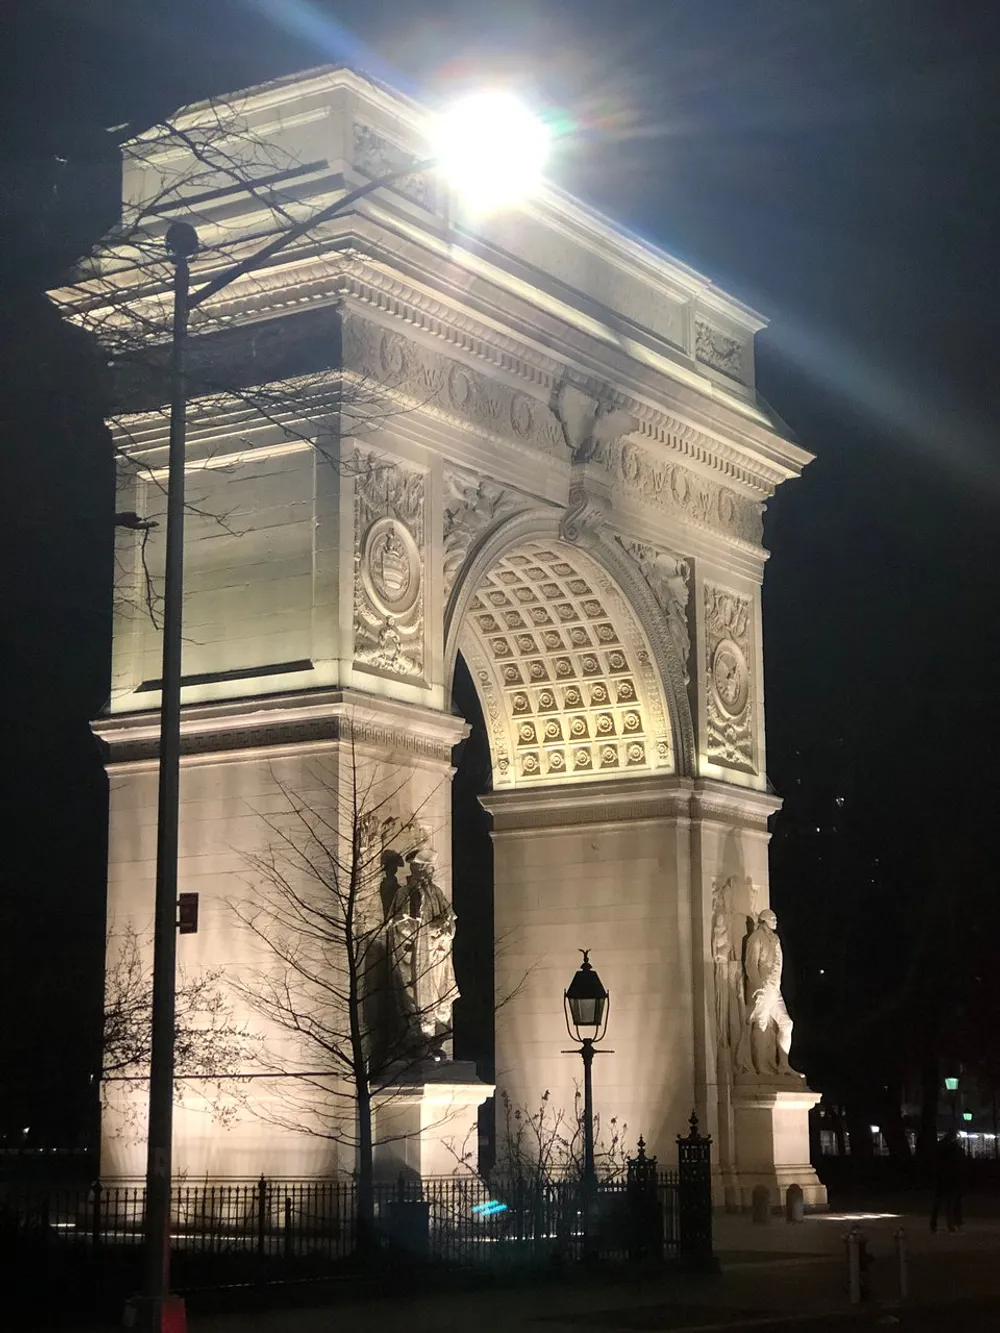 The photo shows a beautifully illuminated arch monument at night with intricate sculptures and a bright street lamp casting a glow on its facade